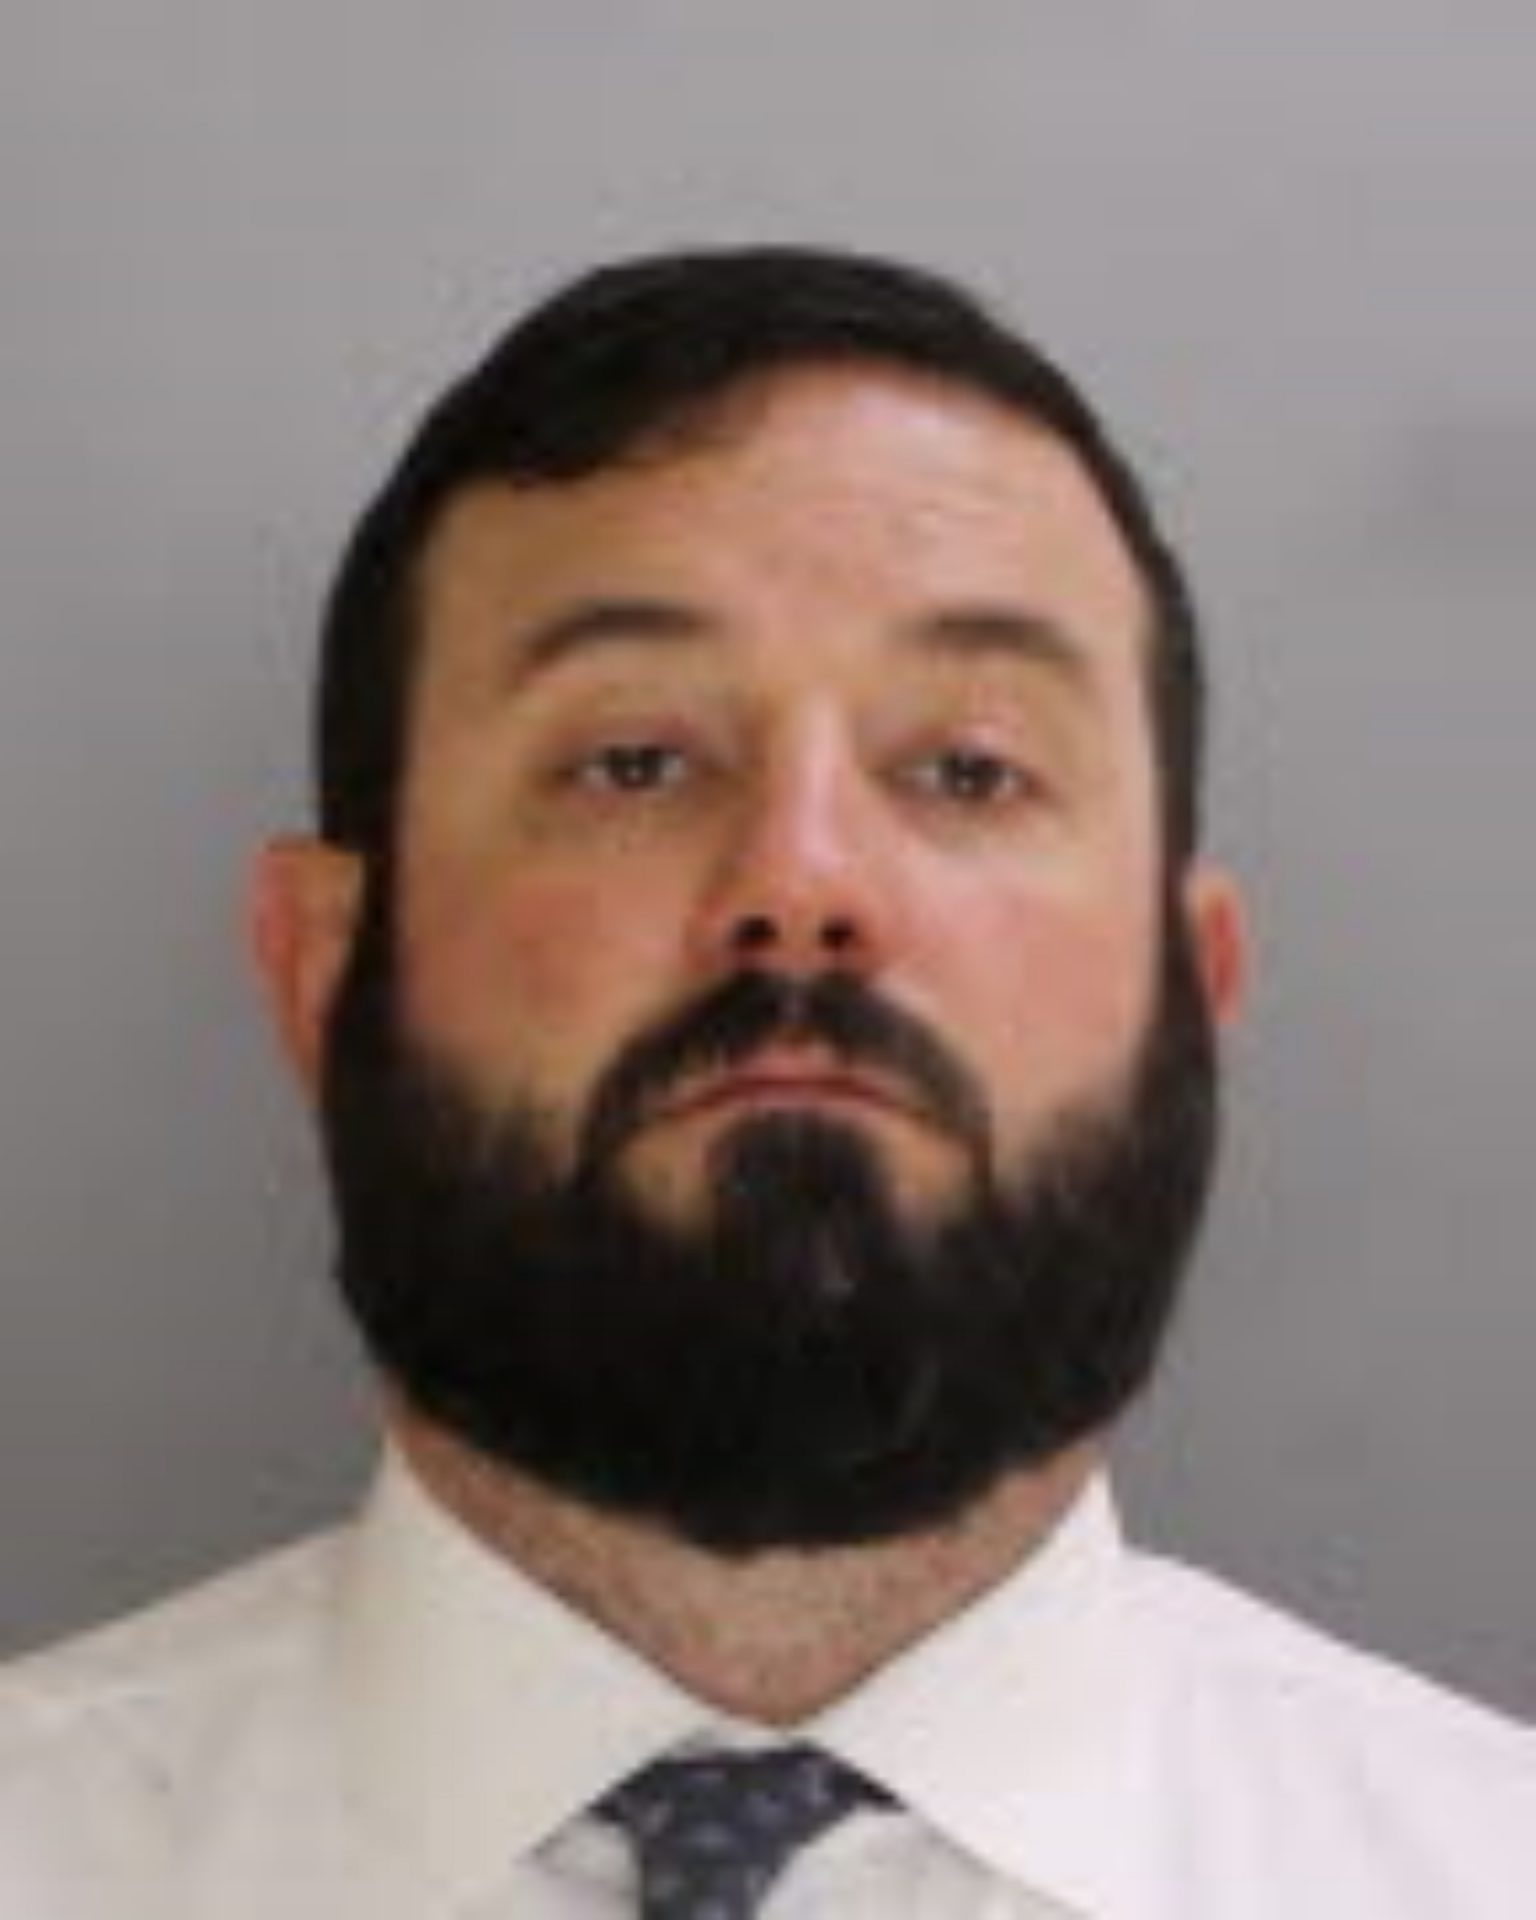 Nikolas McKinnon, senior security adviser for TigerSwan, faces charges of bribery and conspiracy related to security of the Mariner East 2 pipeline in Chester County.